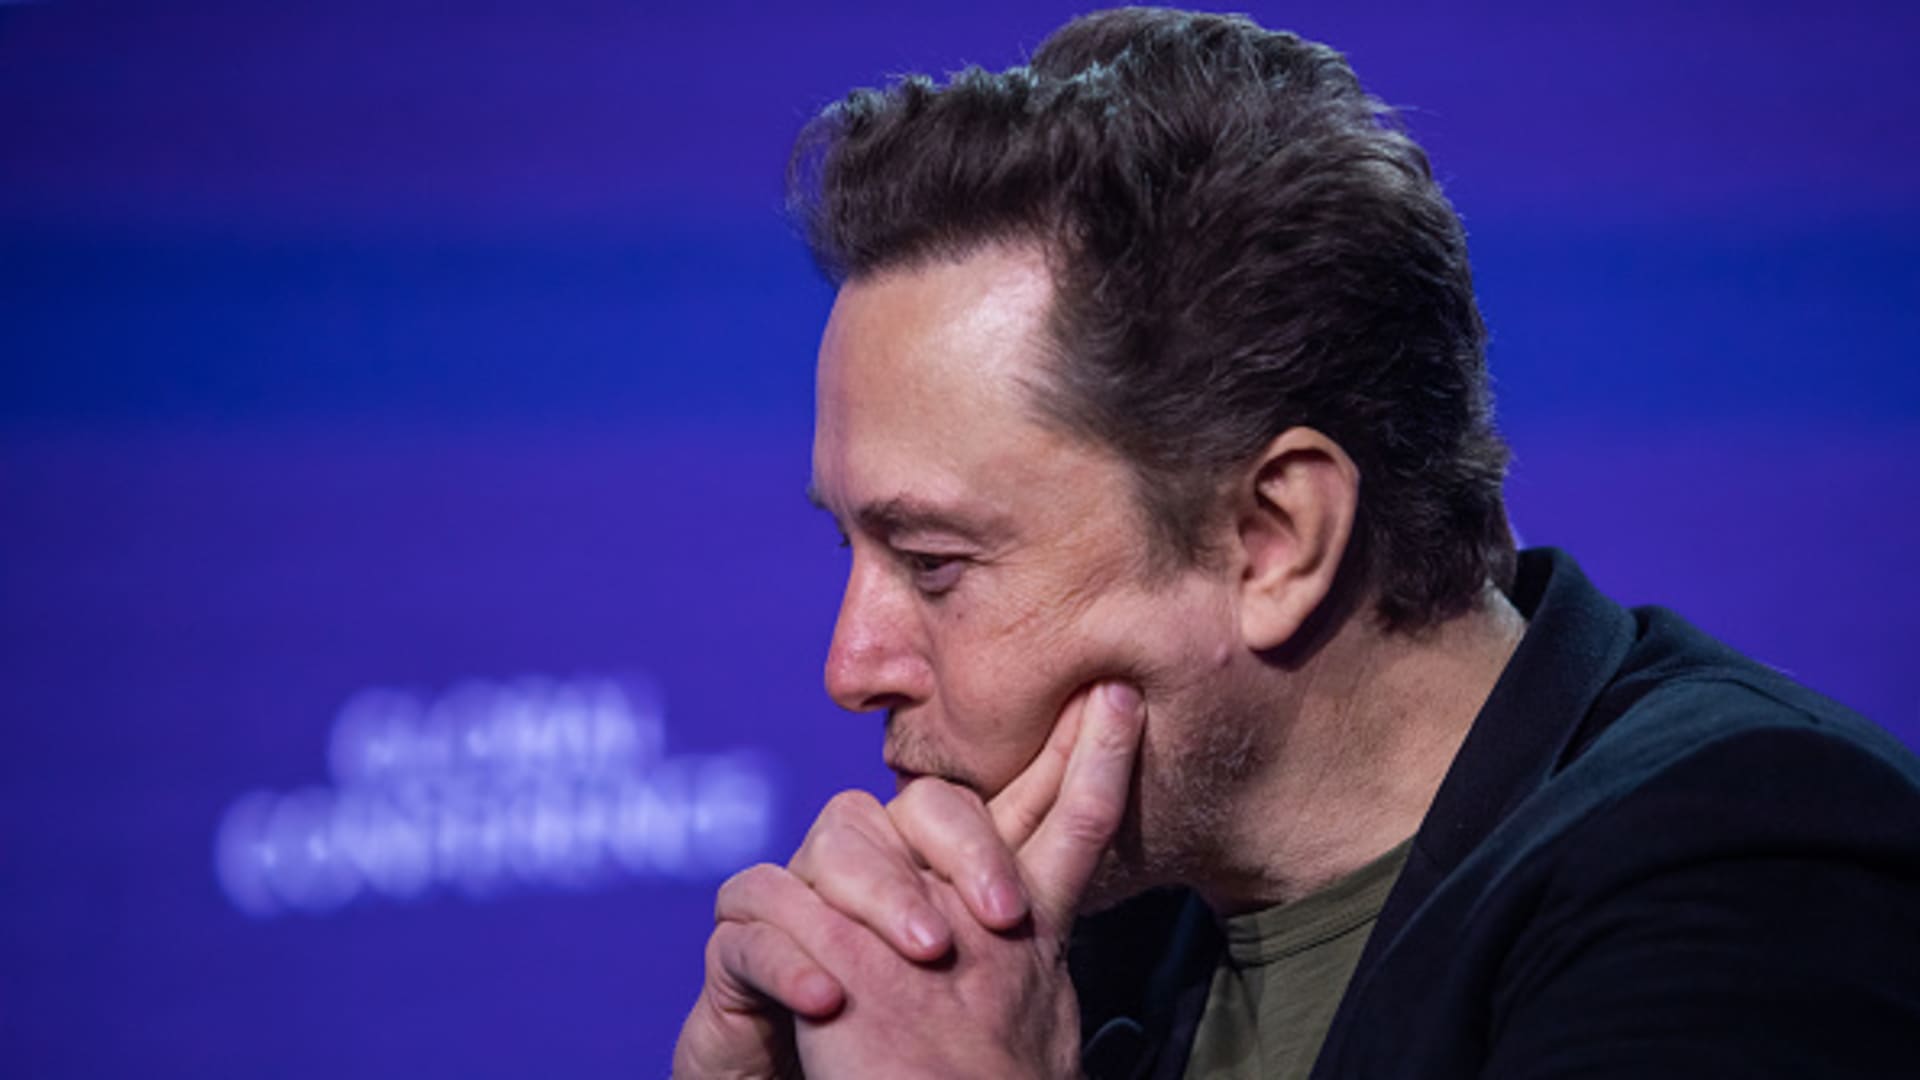 Tesla could use more focus from Elon Musk, says former board member